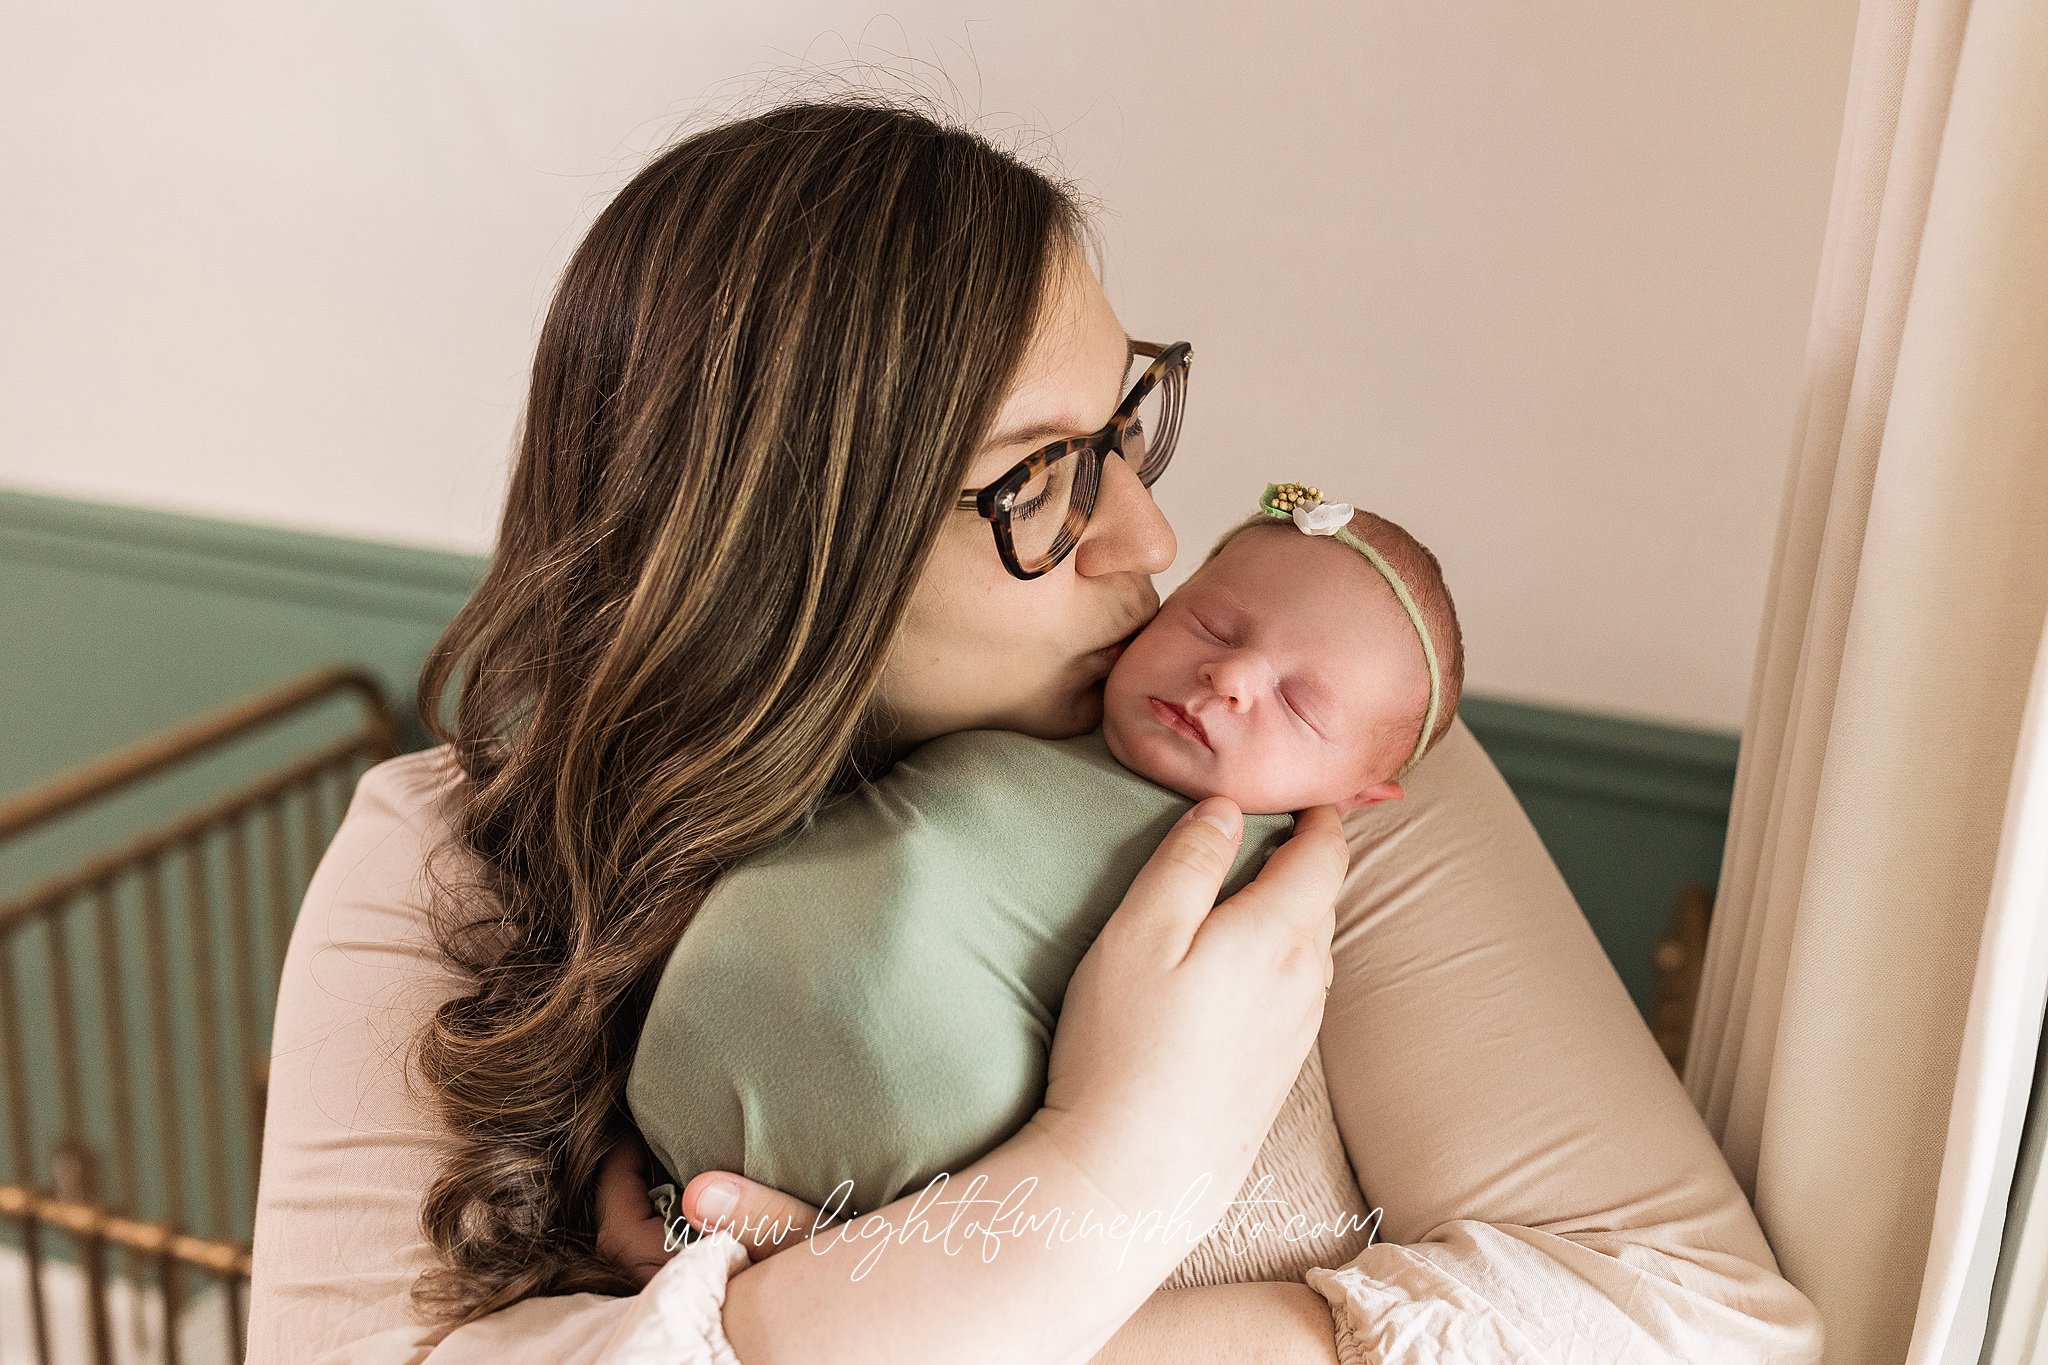  Light of Mine Photography. Combining the art of photography with the miracle of life. Specializing in maternity, birth and newborn photography. Serving Central NY (CNY) and Upstate NY (Syracuse NY, Utica NY, Watertown NY, Baldwinsville NY,&nbsp; Pul